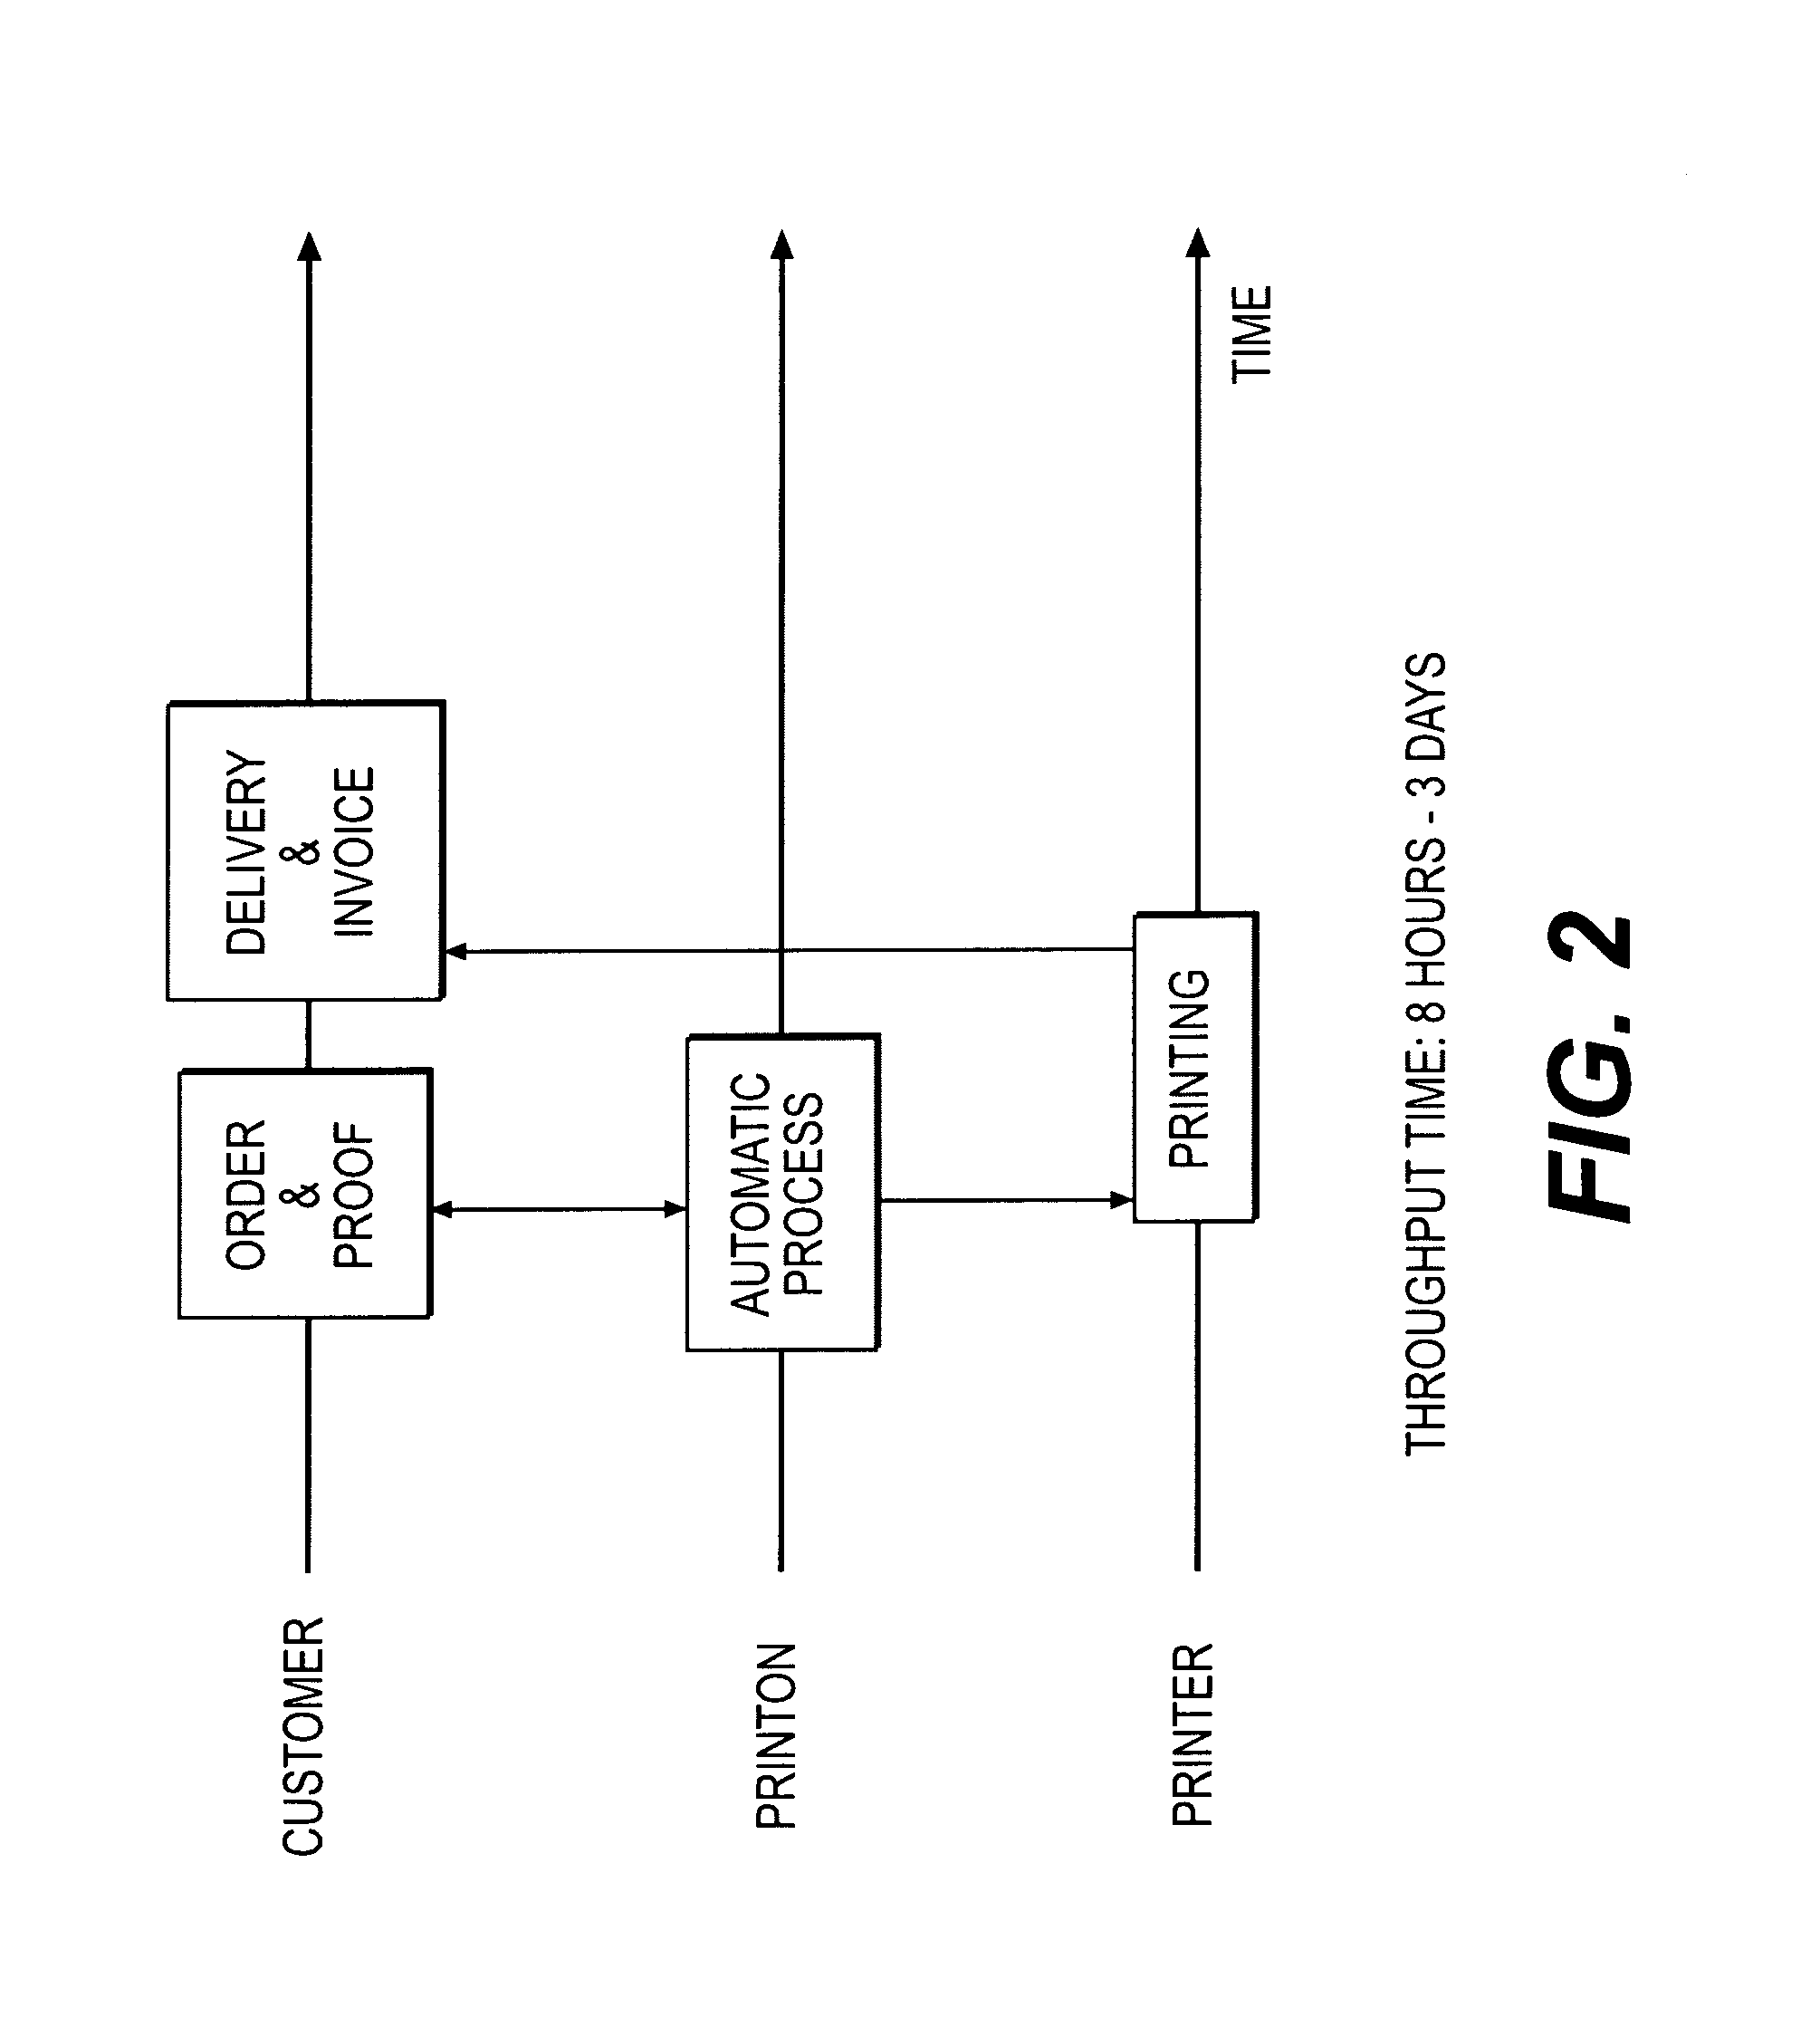 Method and system for online creation and ordering of customized material for printing